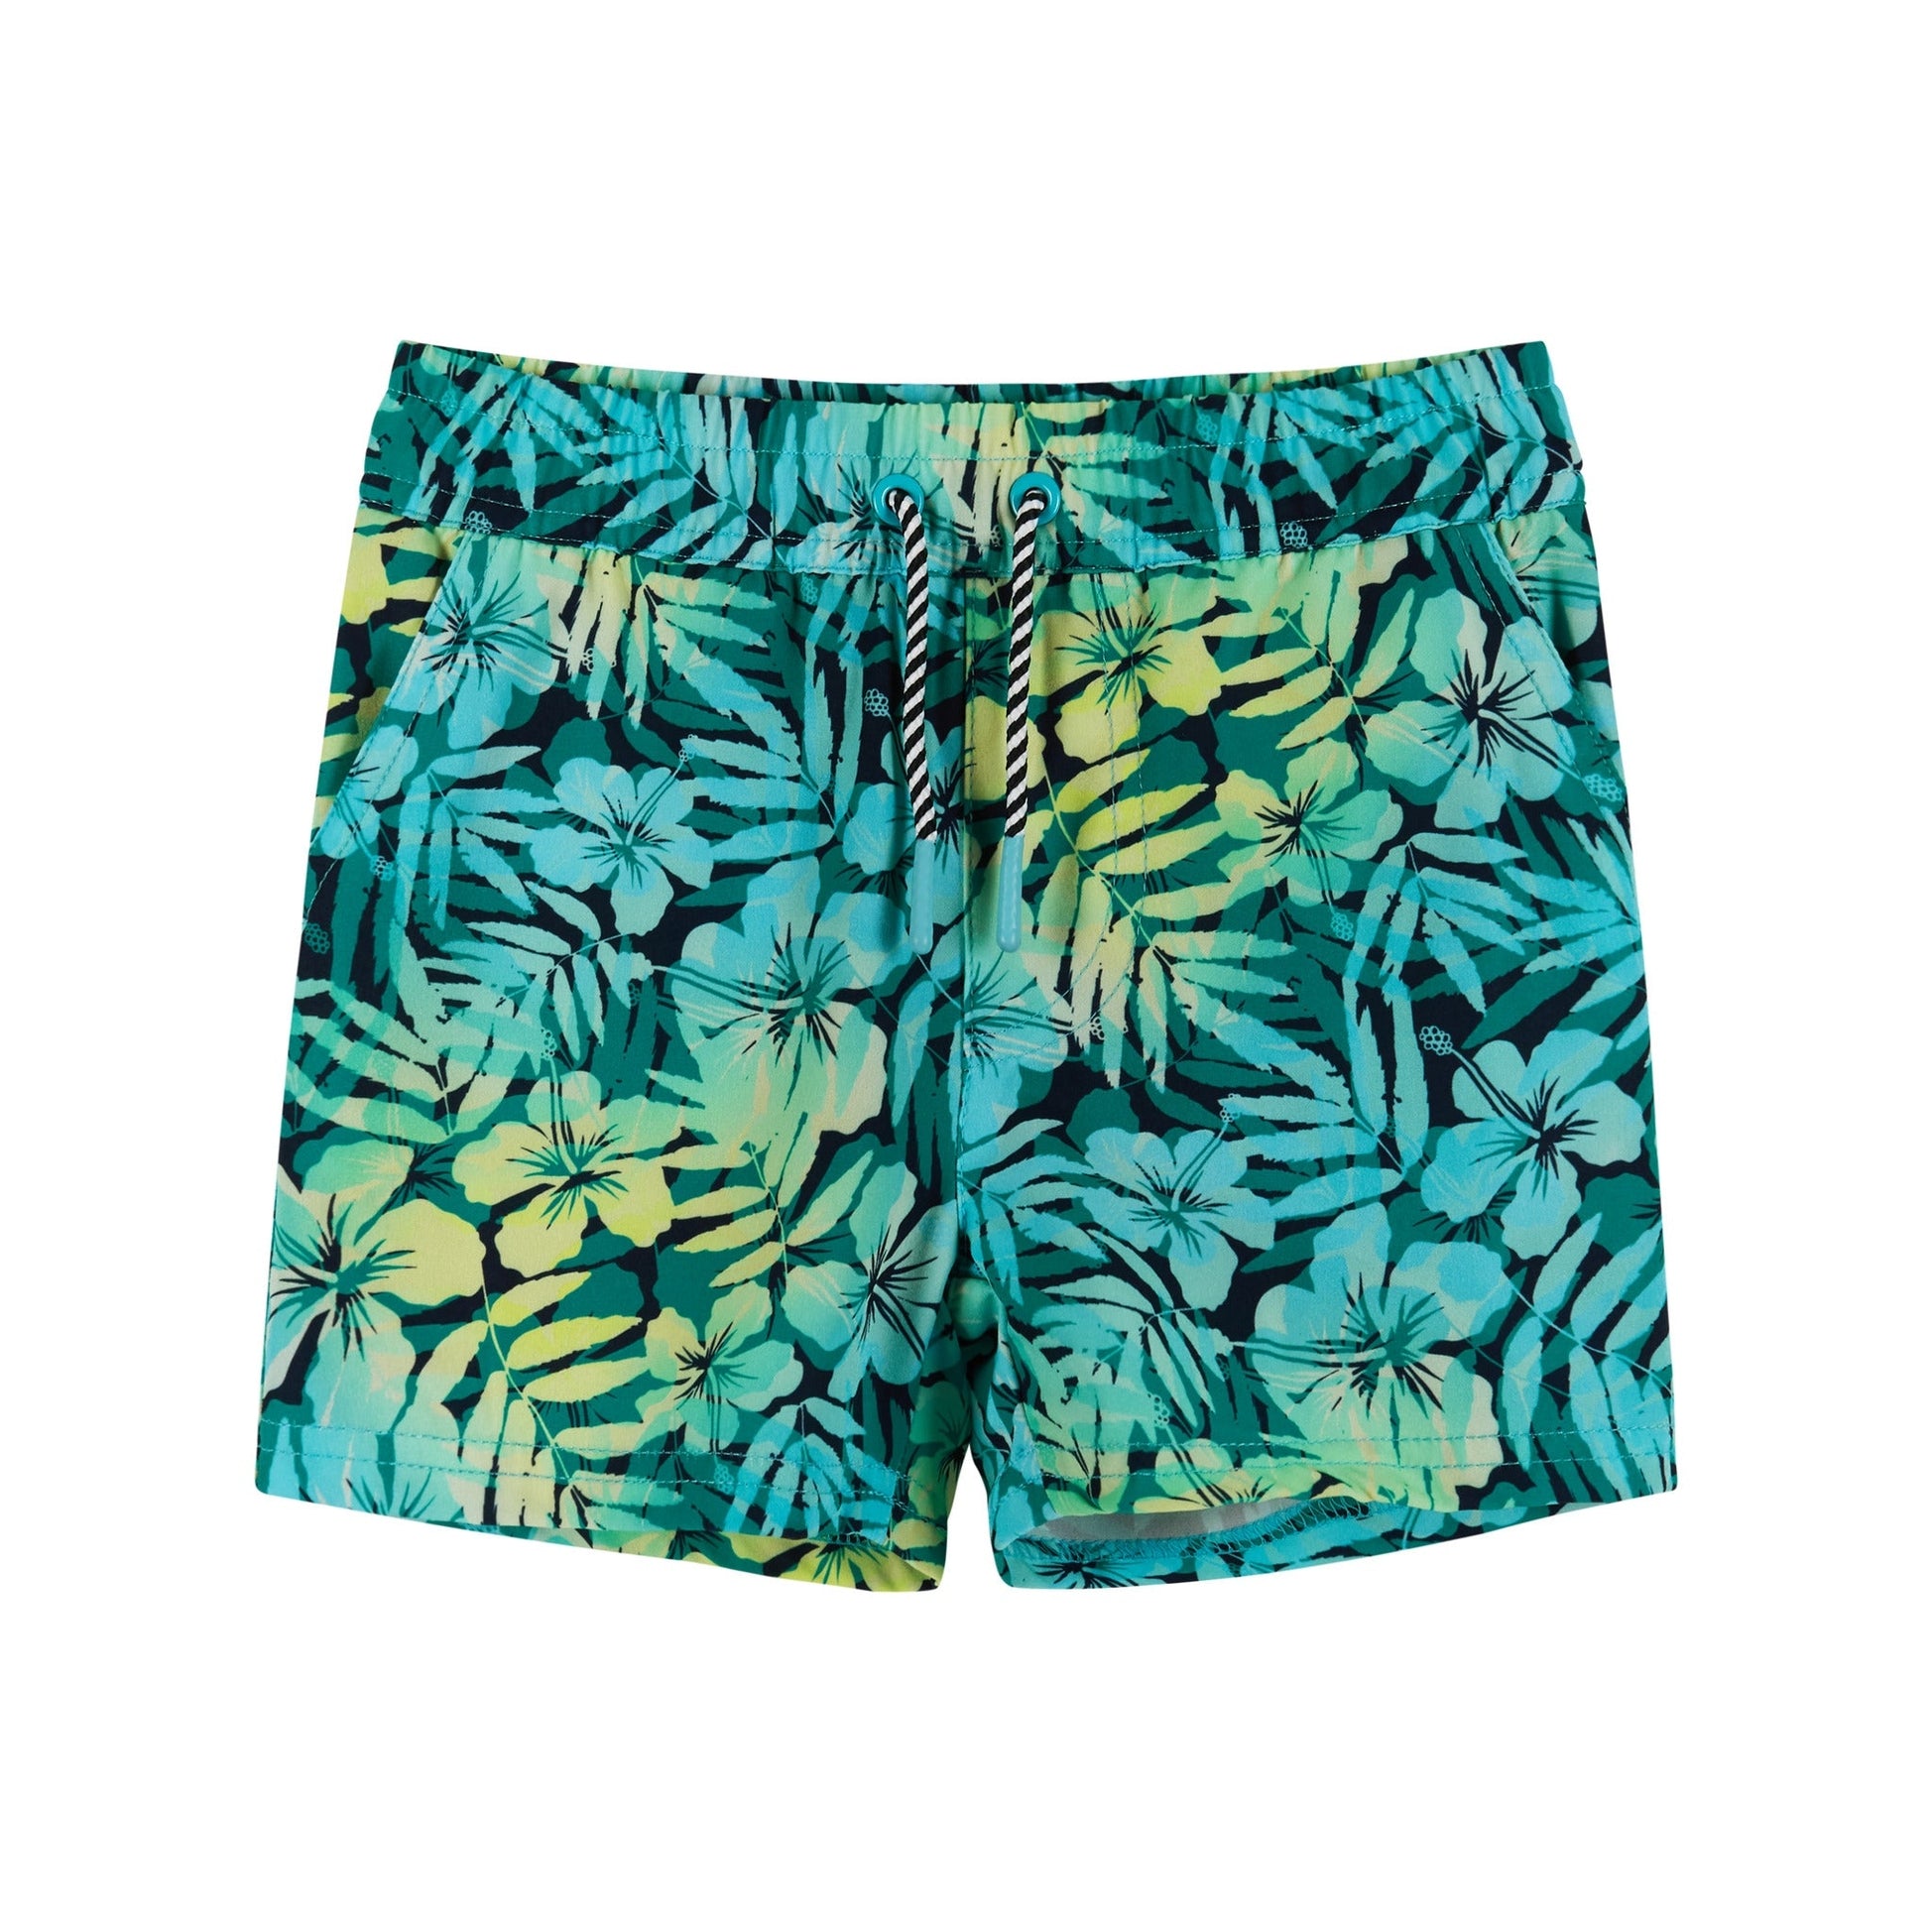 Andy & Evan Stretch Lined Boardshort - Blue Tropical